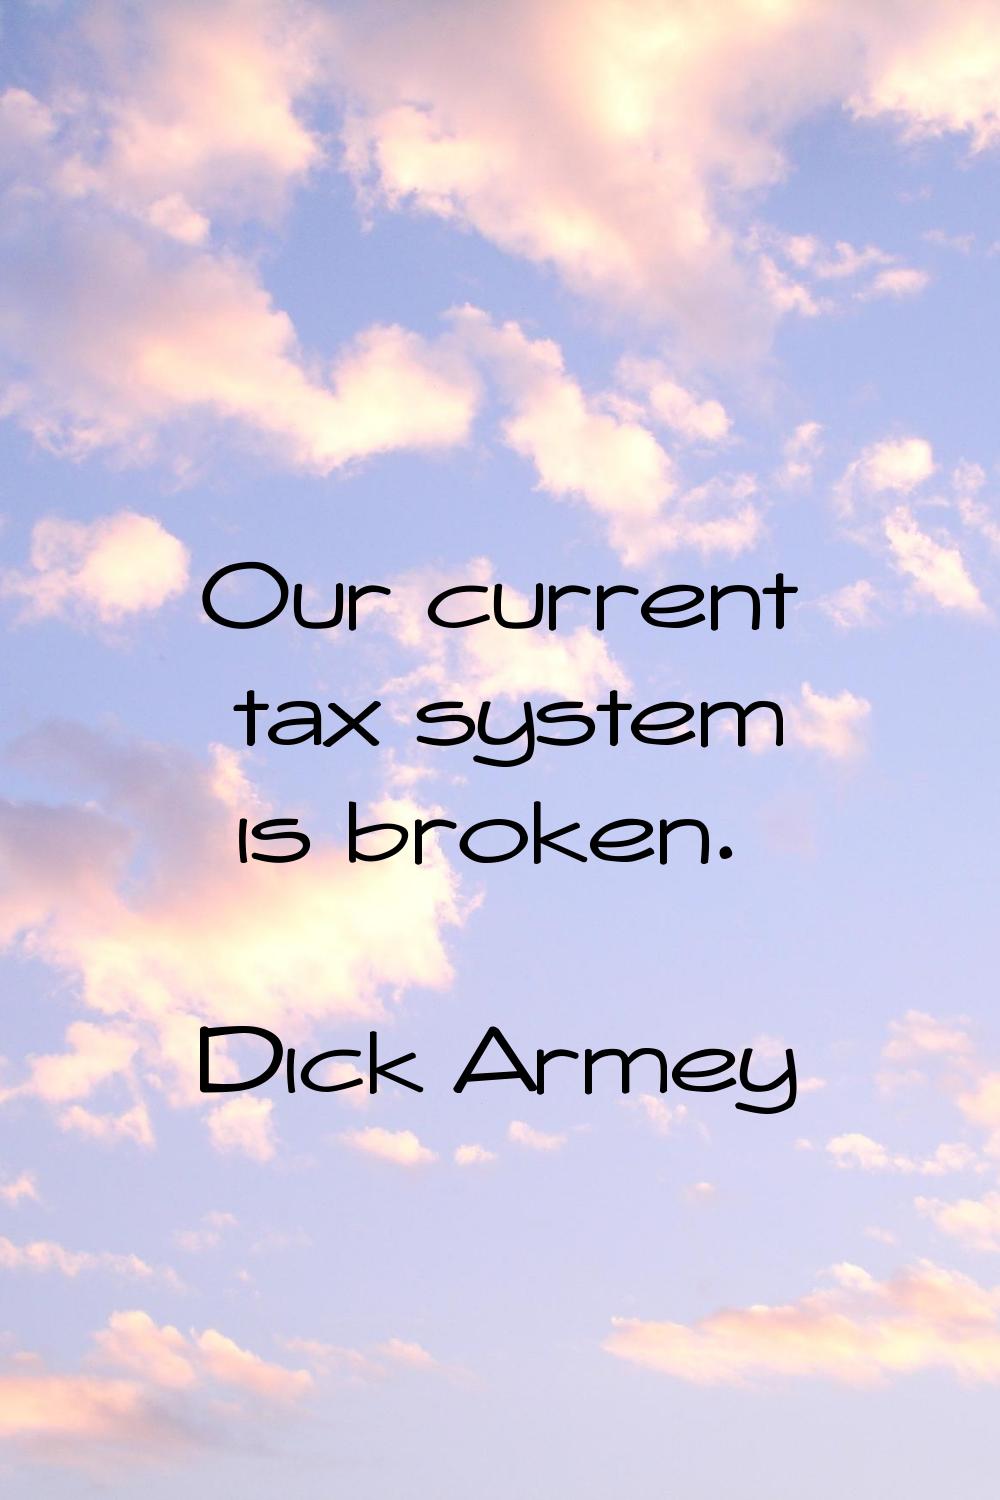 Our current tax system is broken.